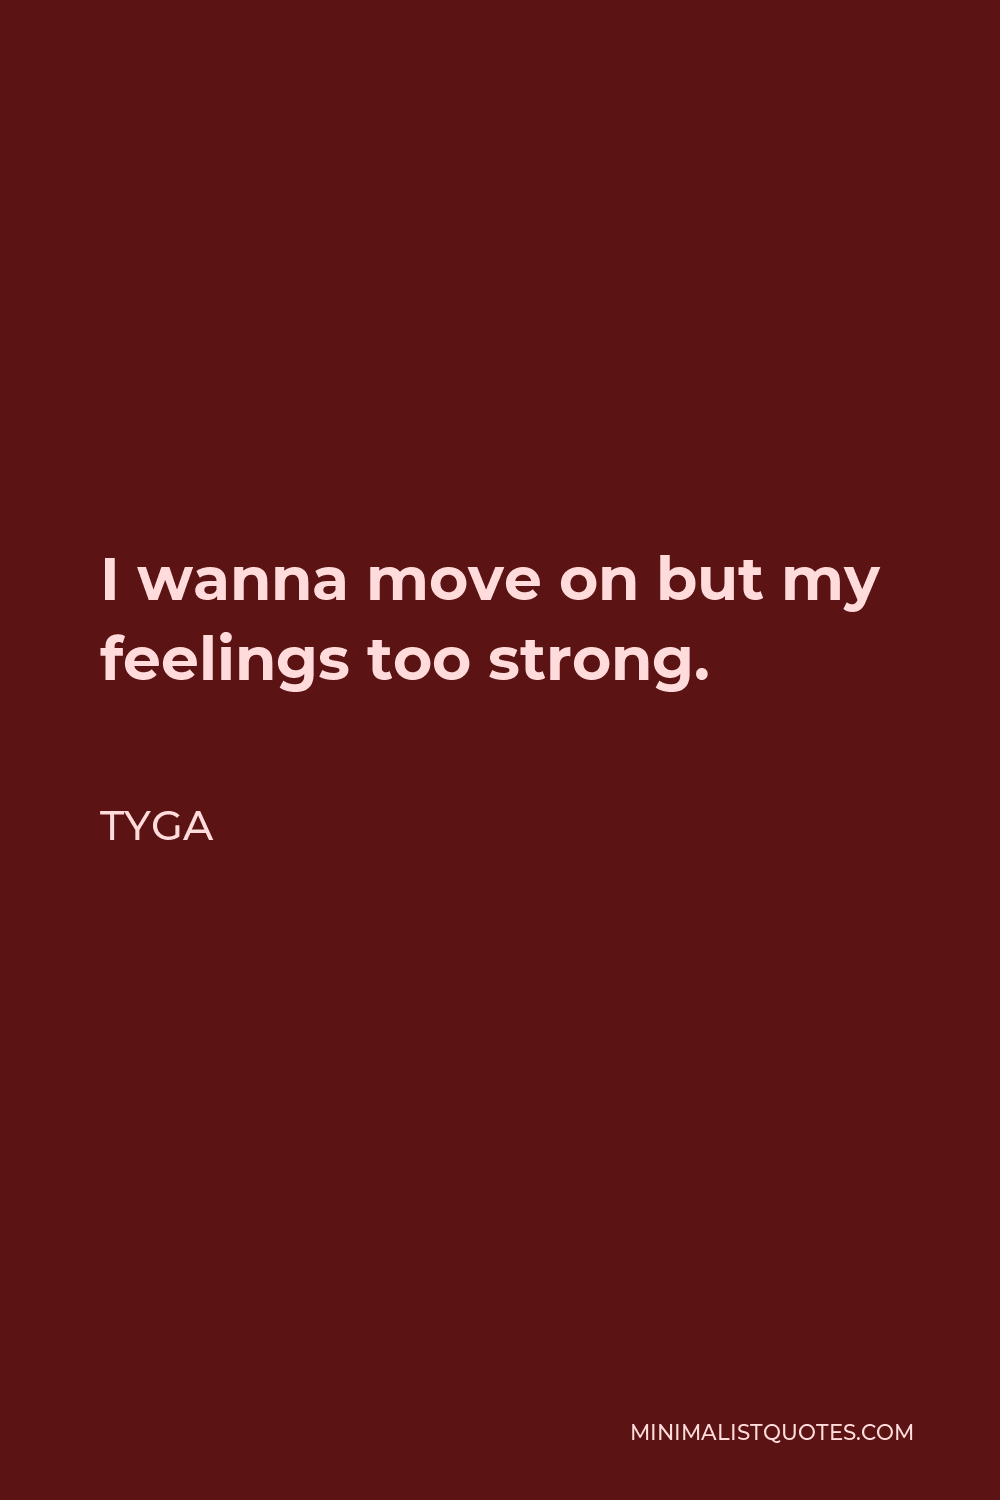 Tyga Quote - I wanna move on but my feelings too strong.